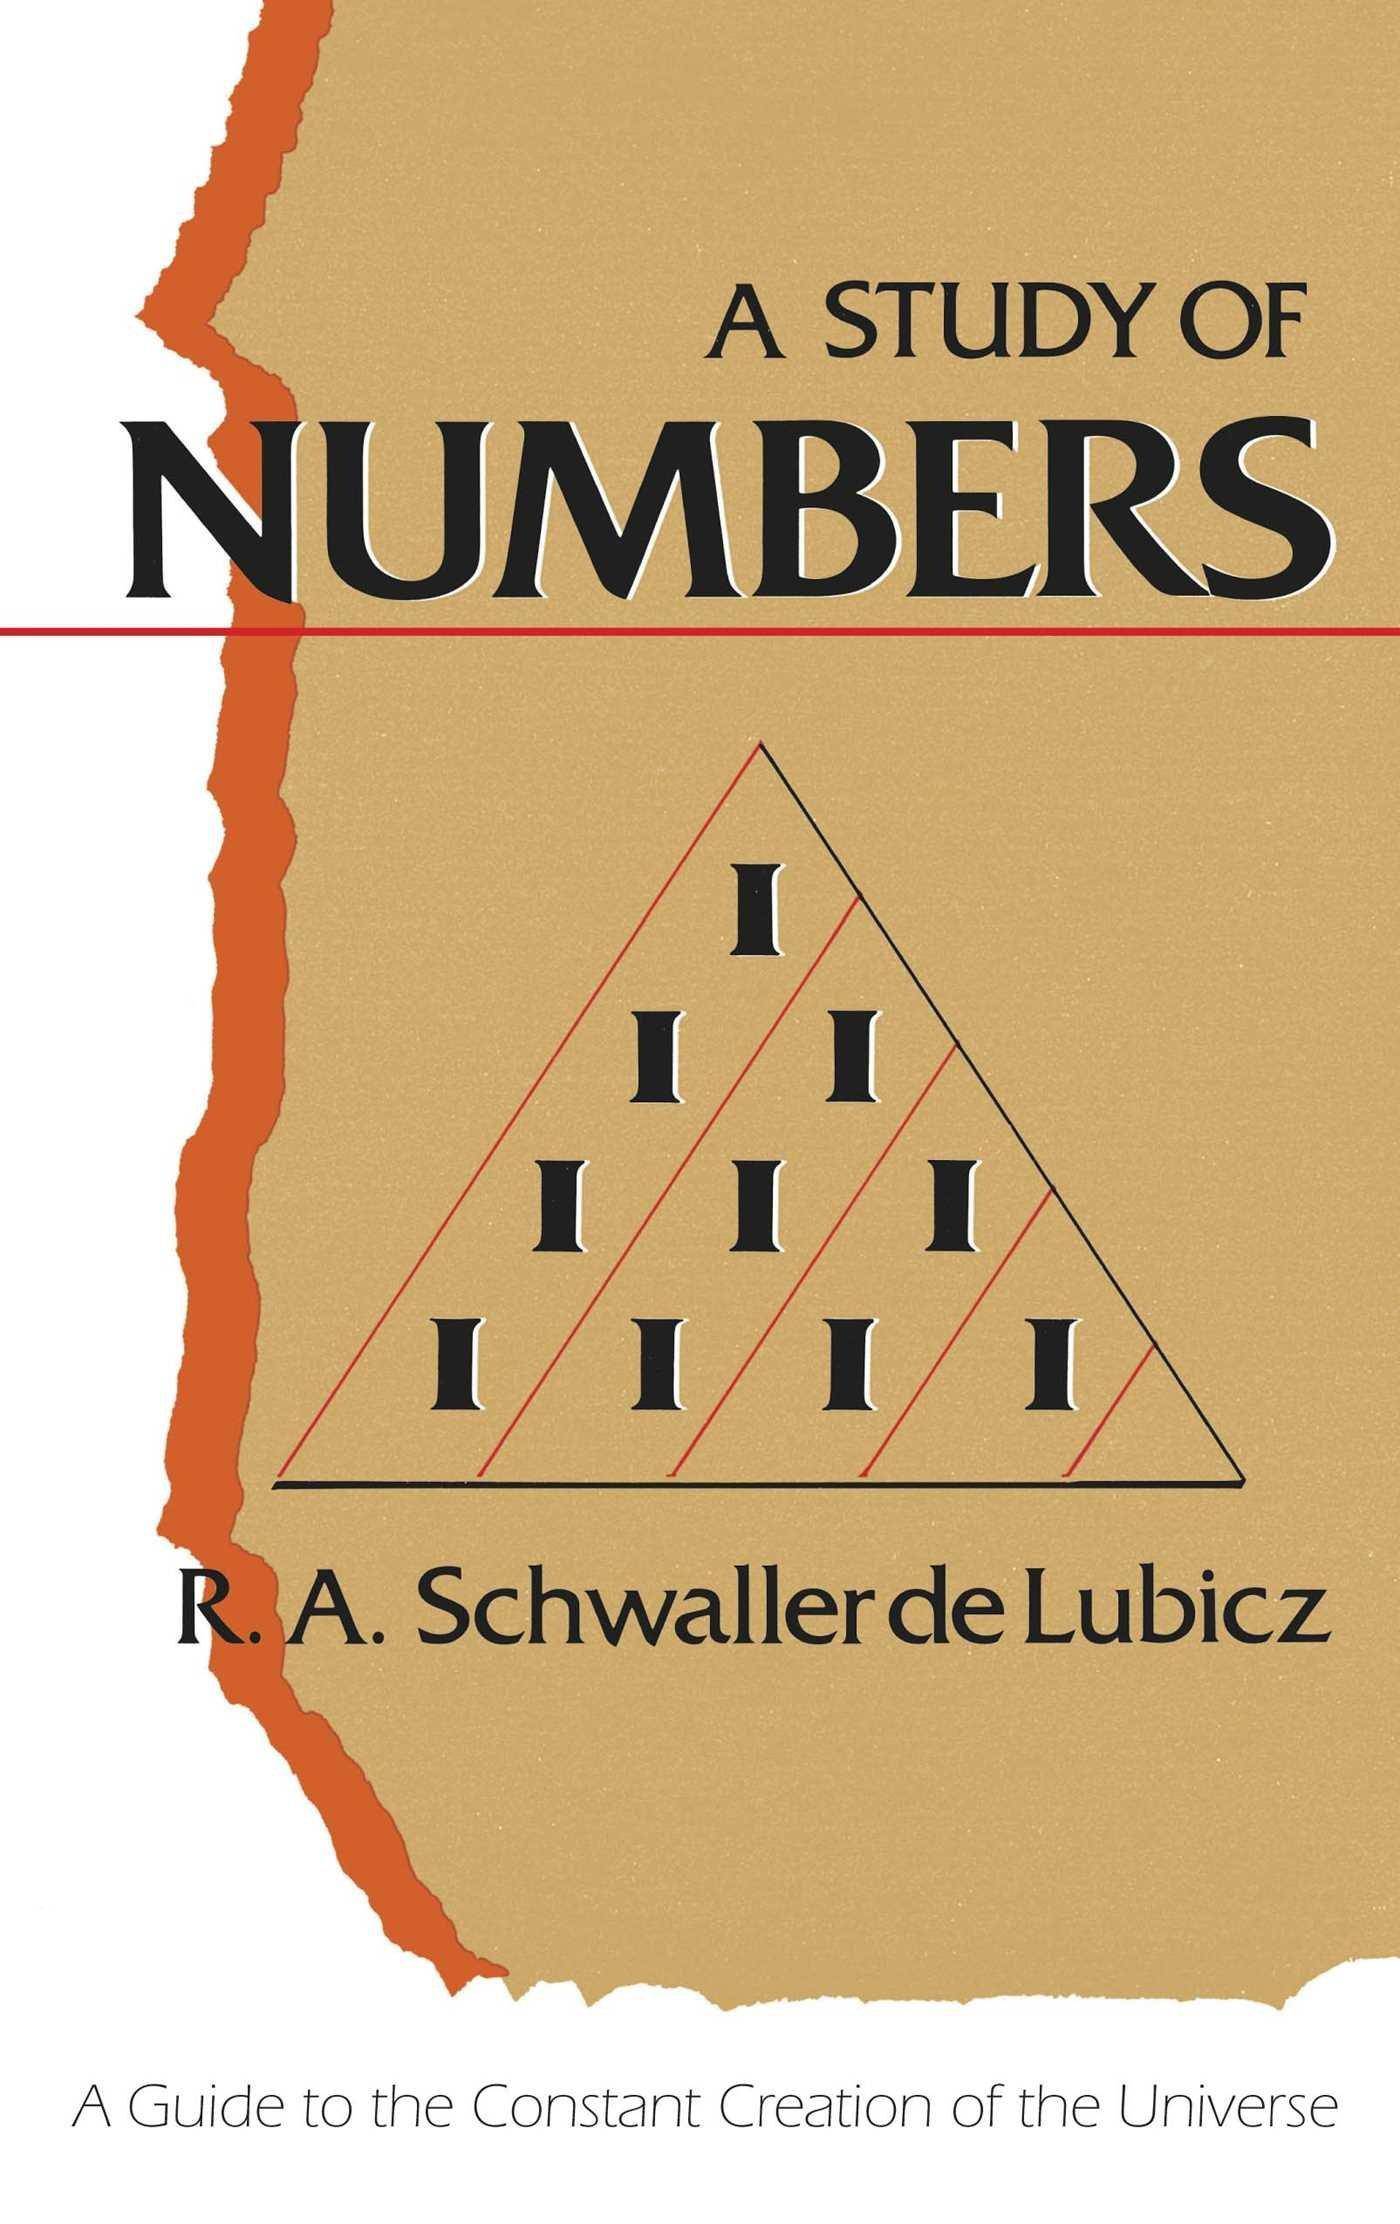 Study of Numbers: A Guide to the Constant Creation of the Univer - SureShot Books Publishing LLC